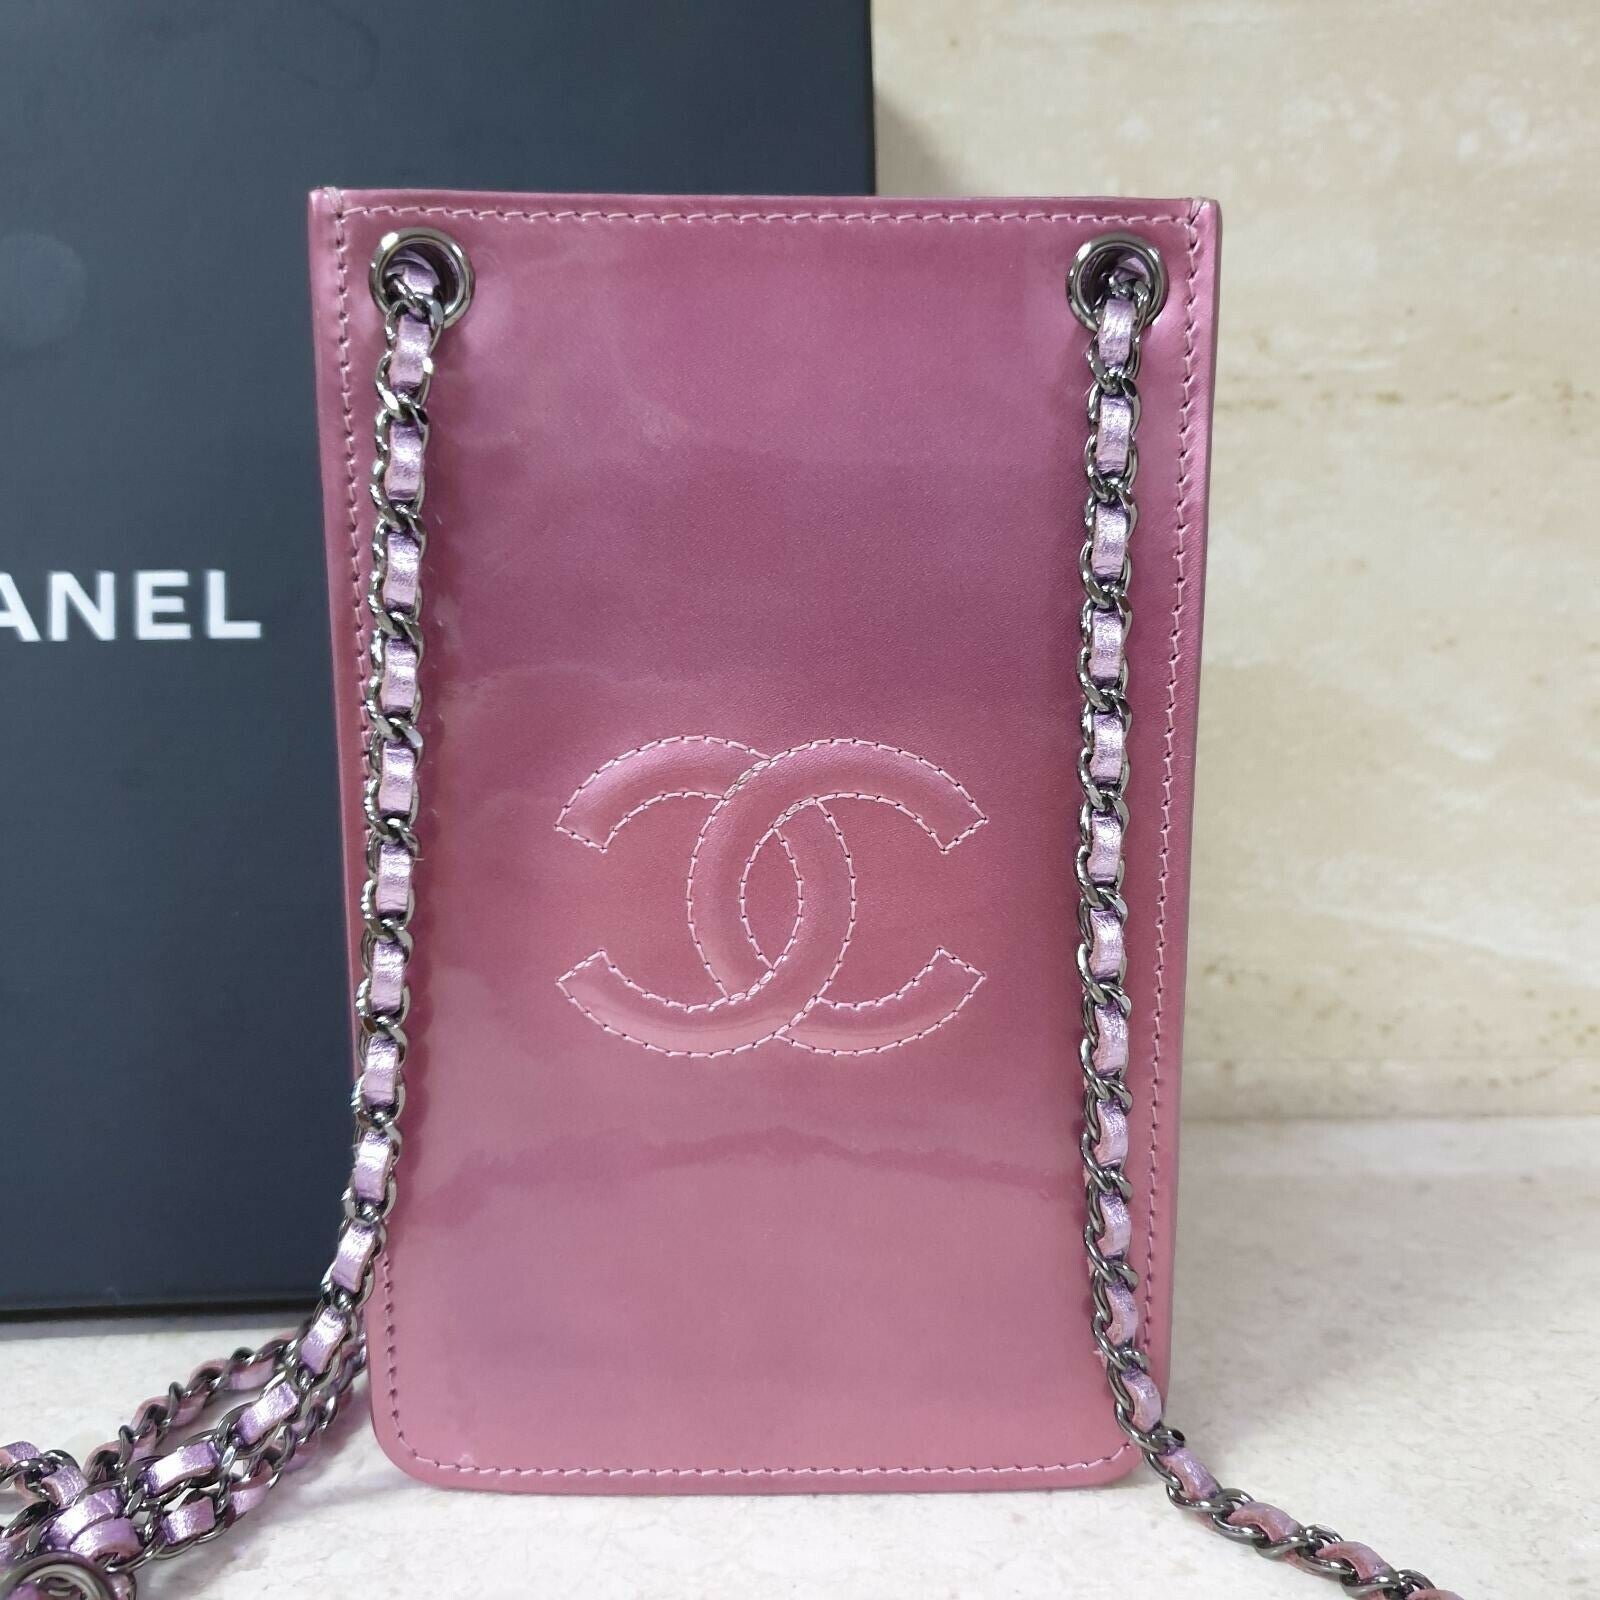 pink patent leather chanel bag